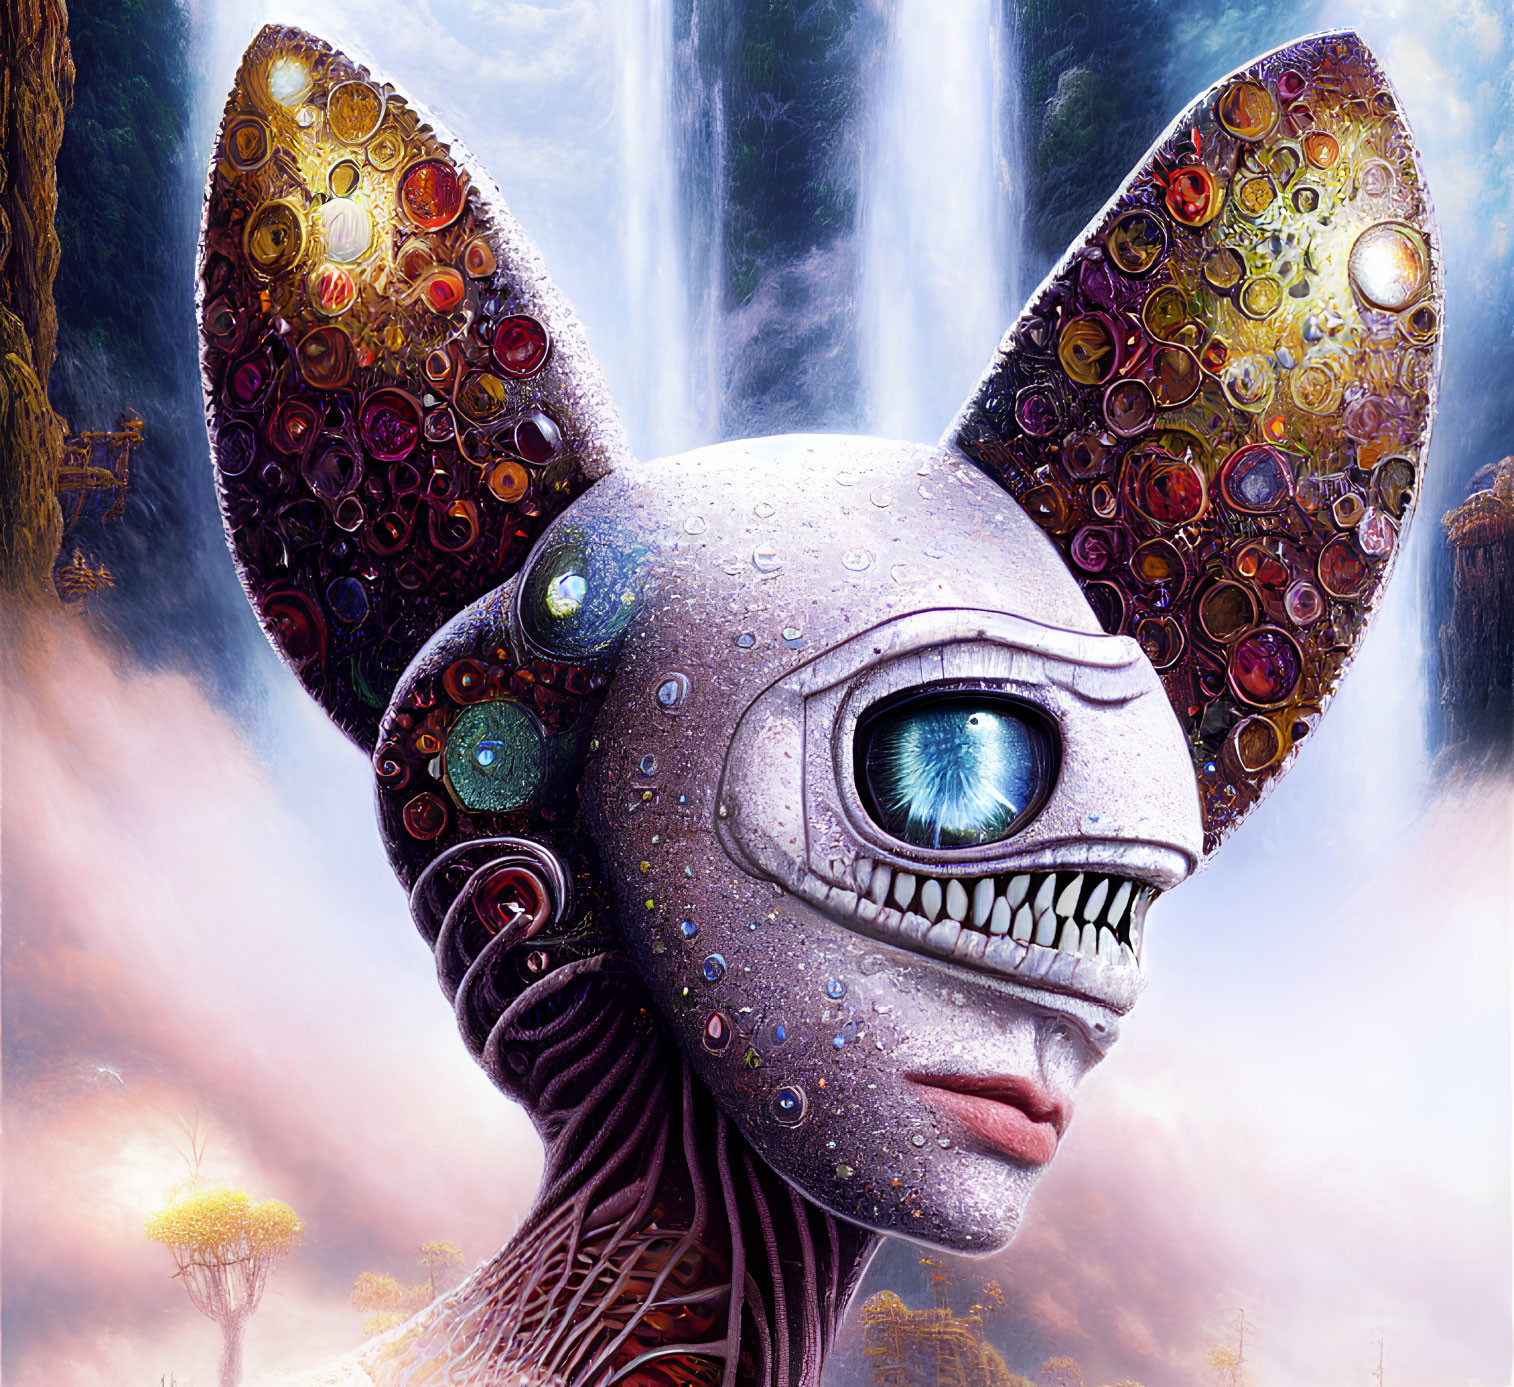 Colorful surreal portrait of a creature with mechanical ears and a detailed eye, in a fantastical setting